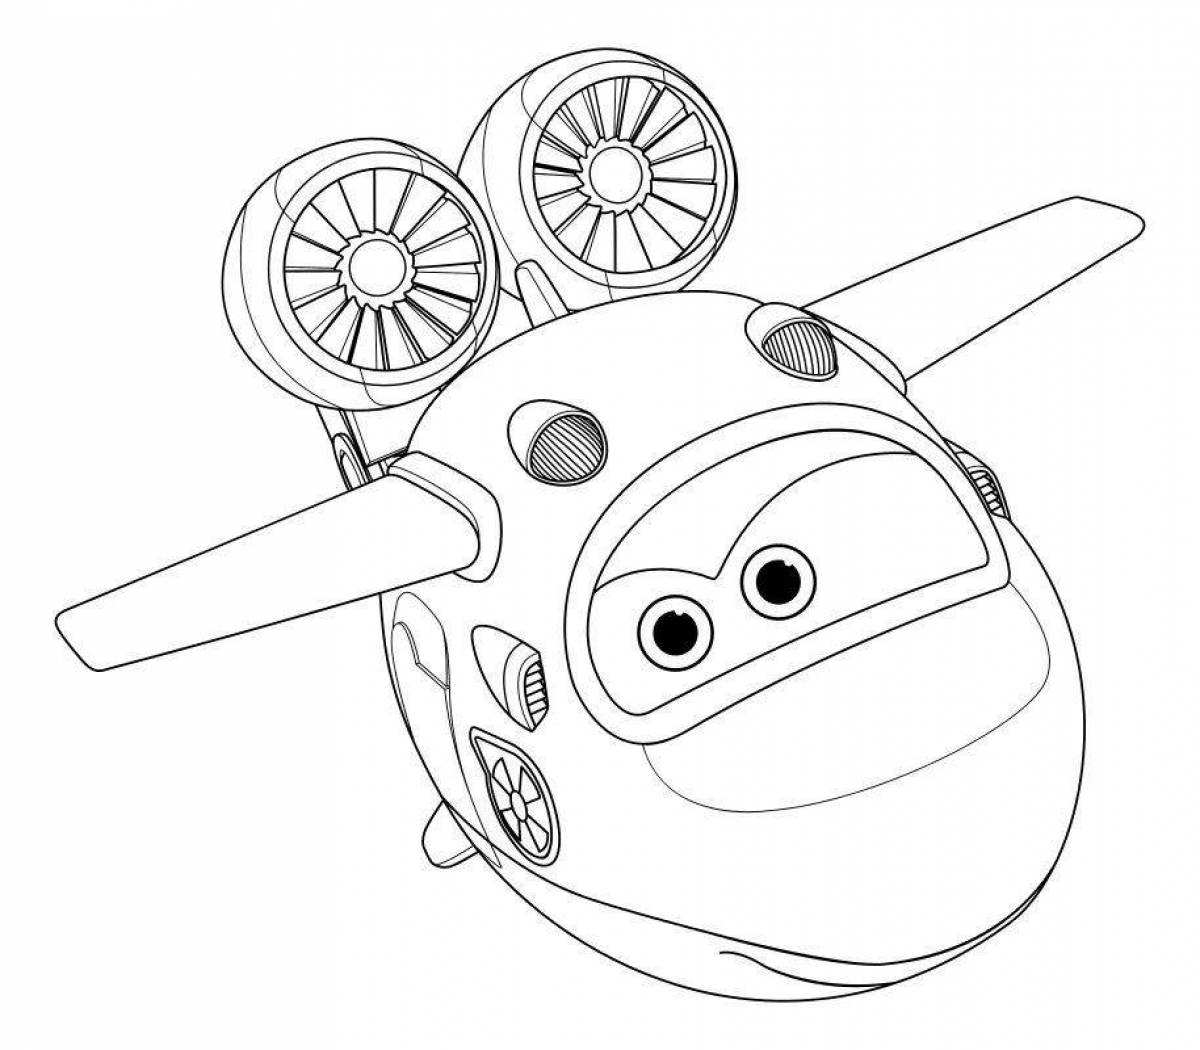 Majestic jet coloring page